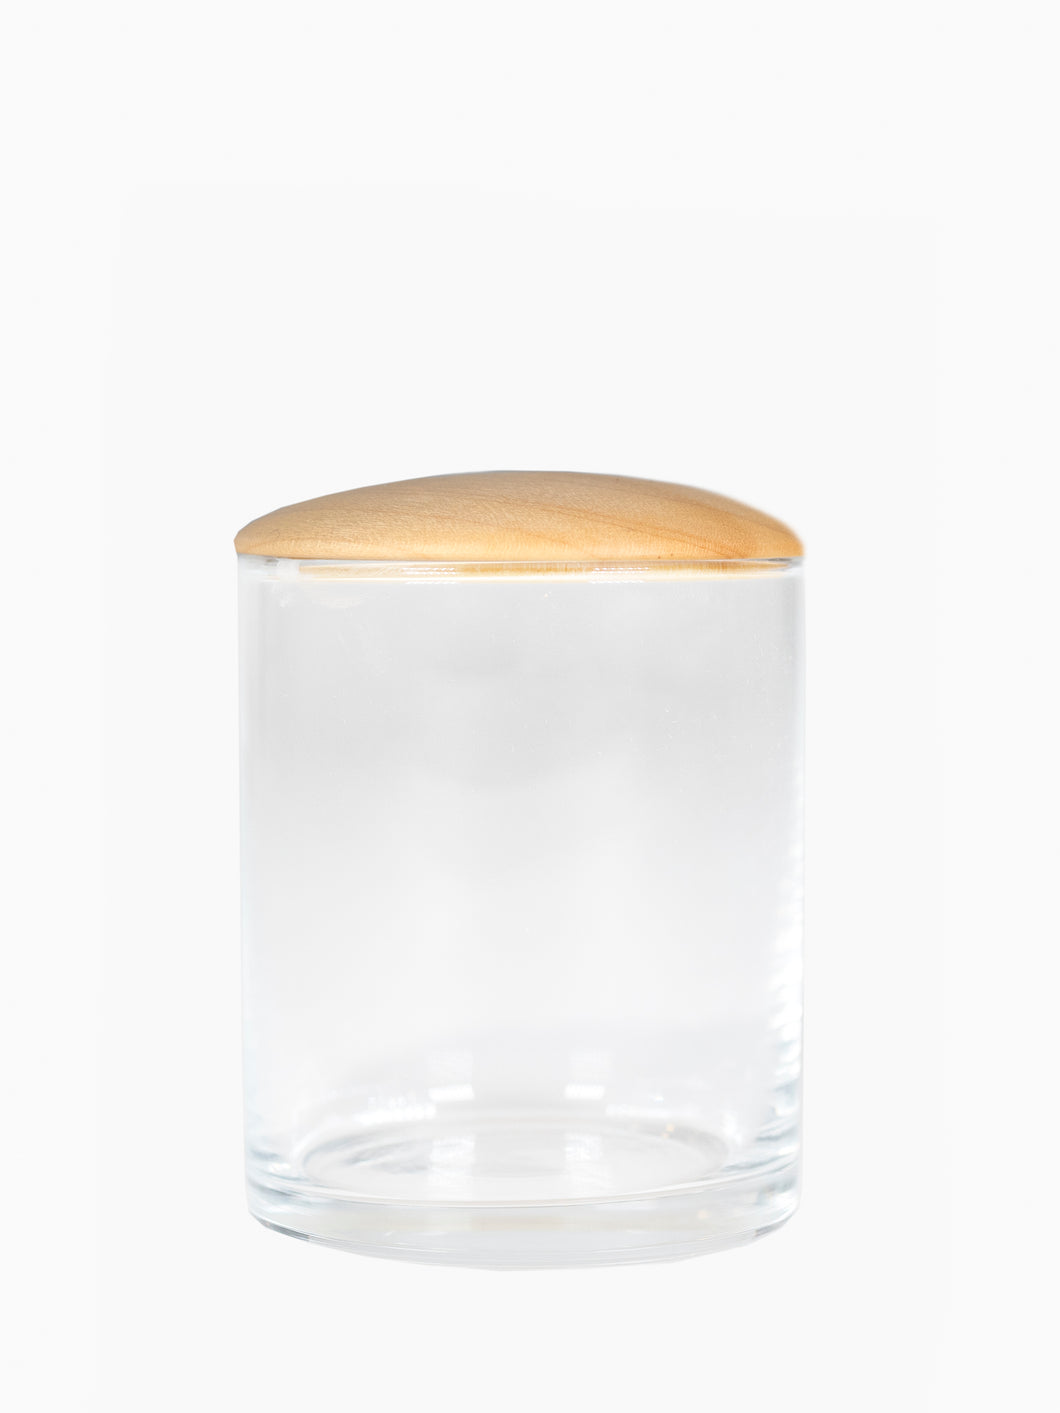 Maple Simple Storage Containers, Small